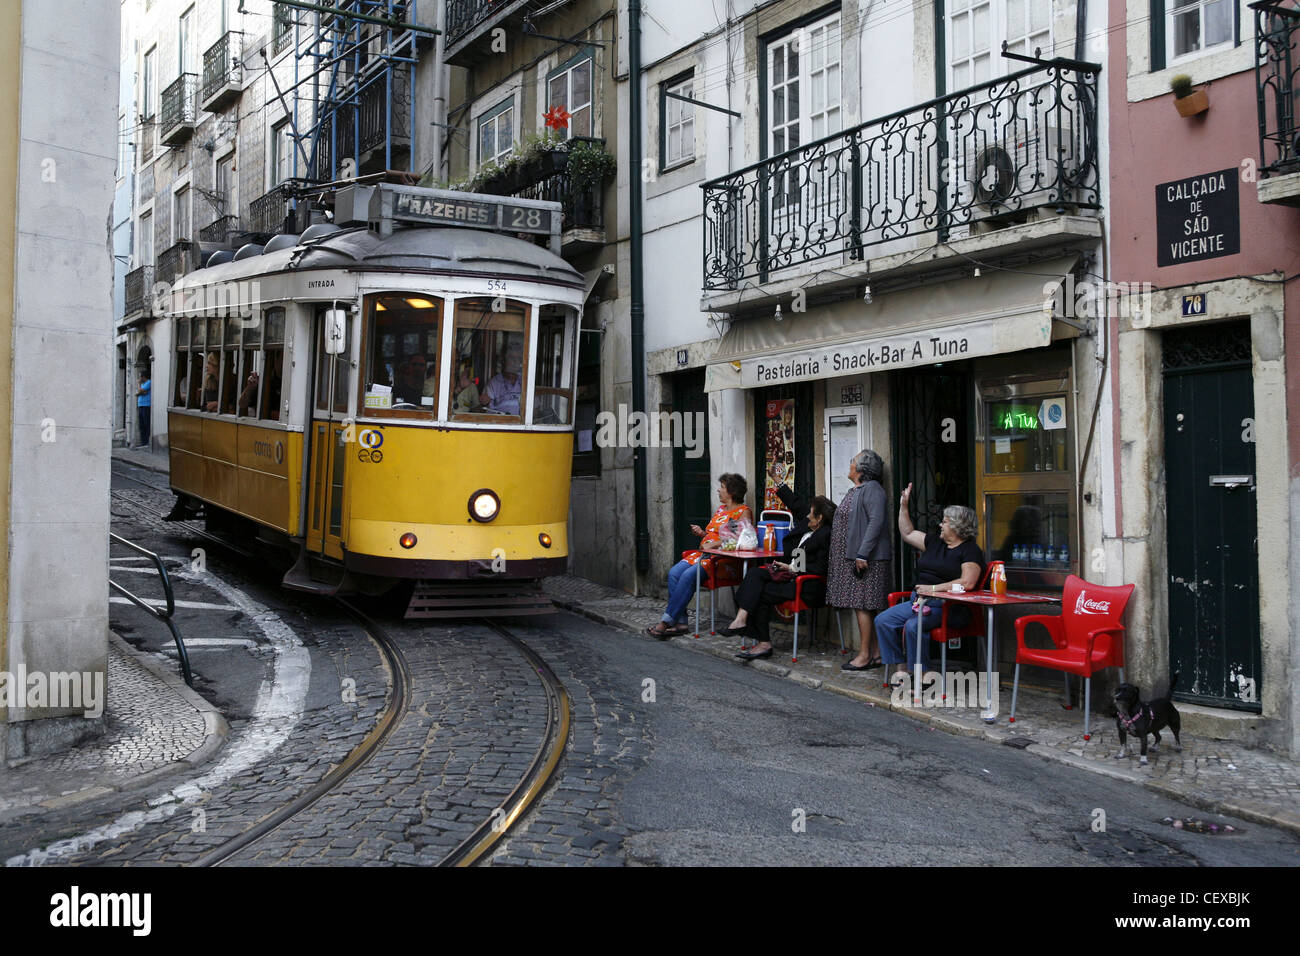 Greeting the Driver of Tram No. 28 in Alfama, Lisbon, Portugal Stock Photo